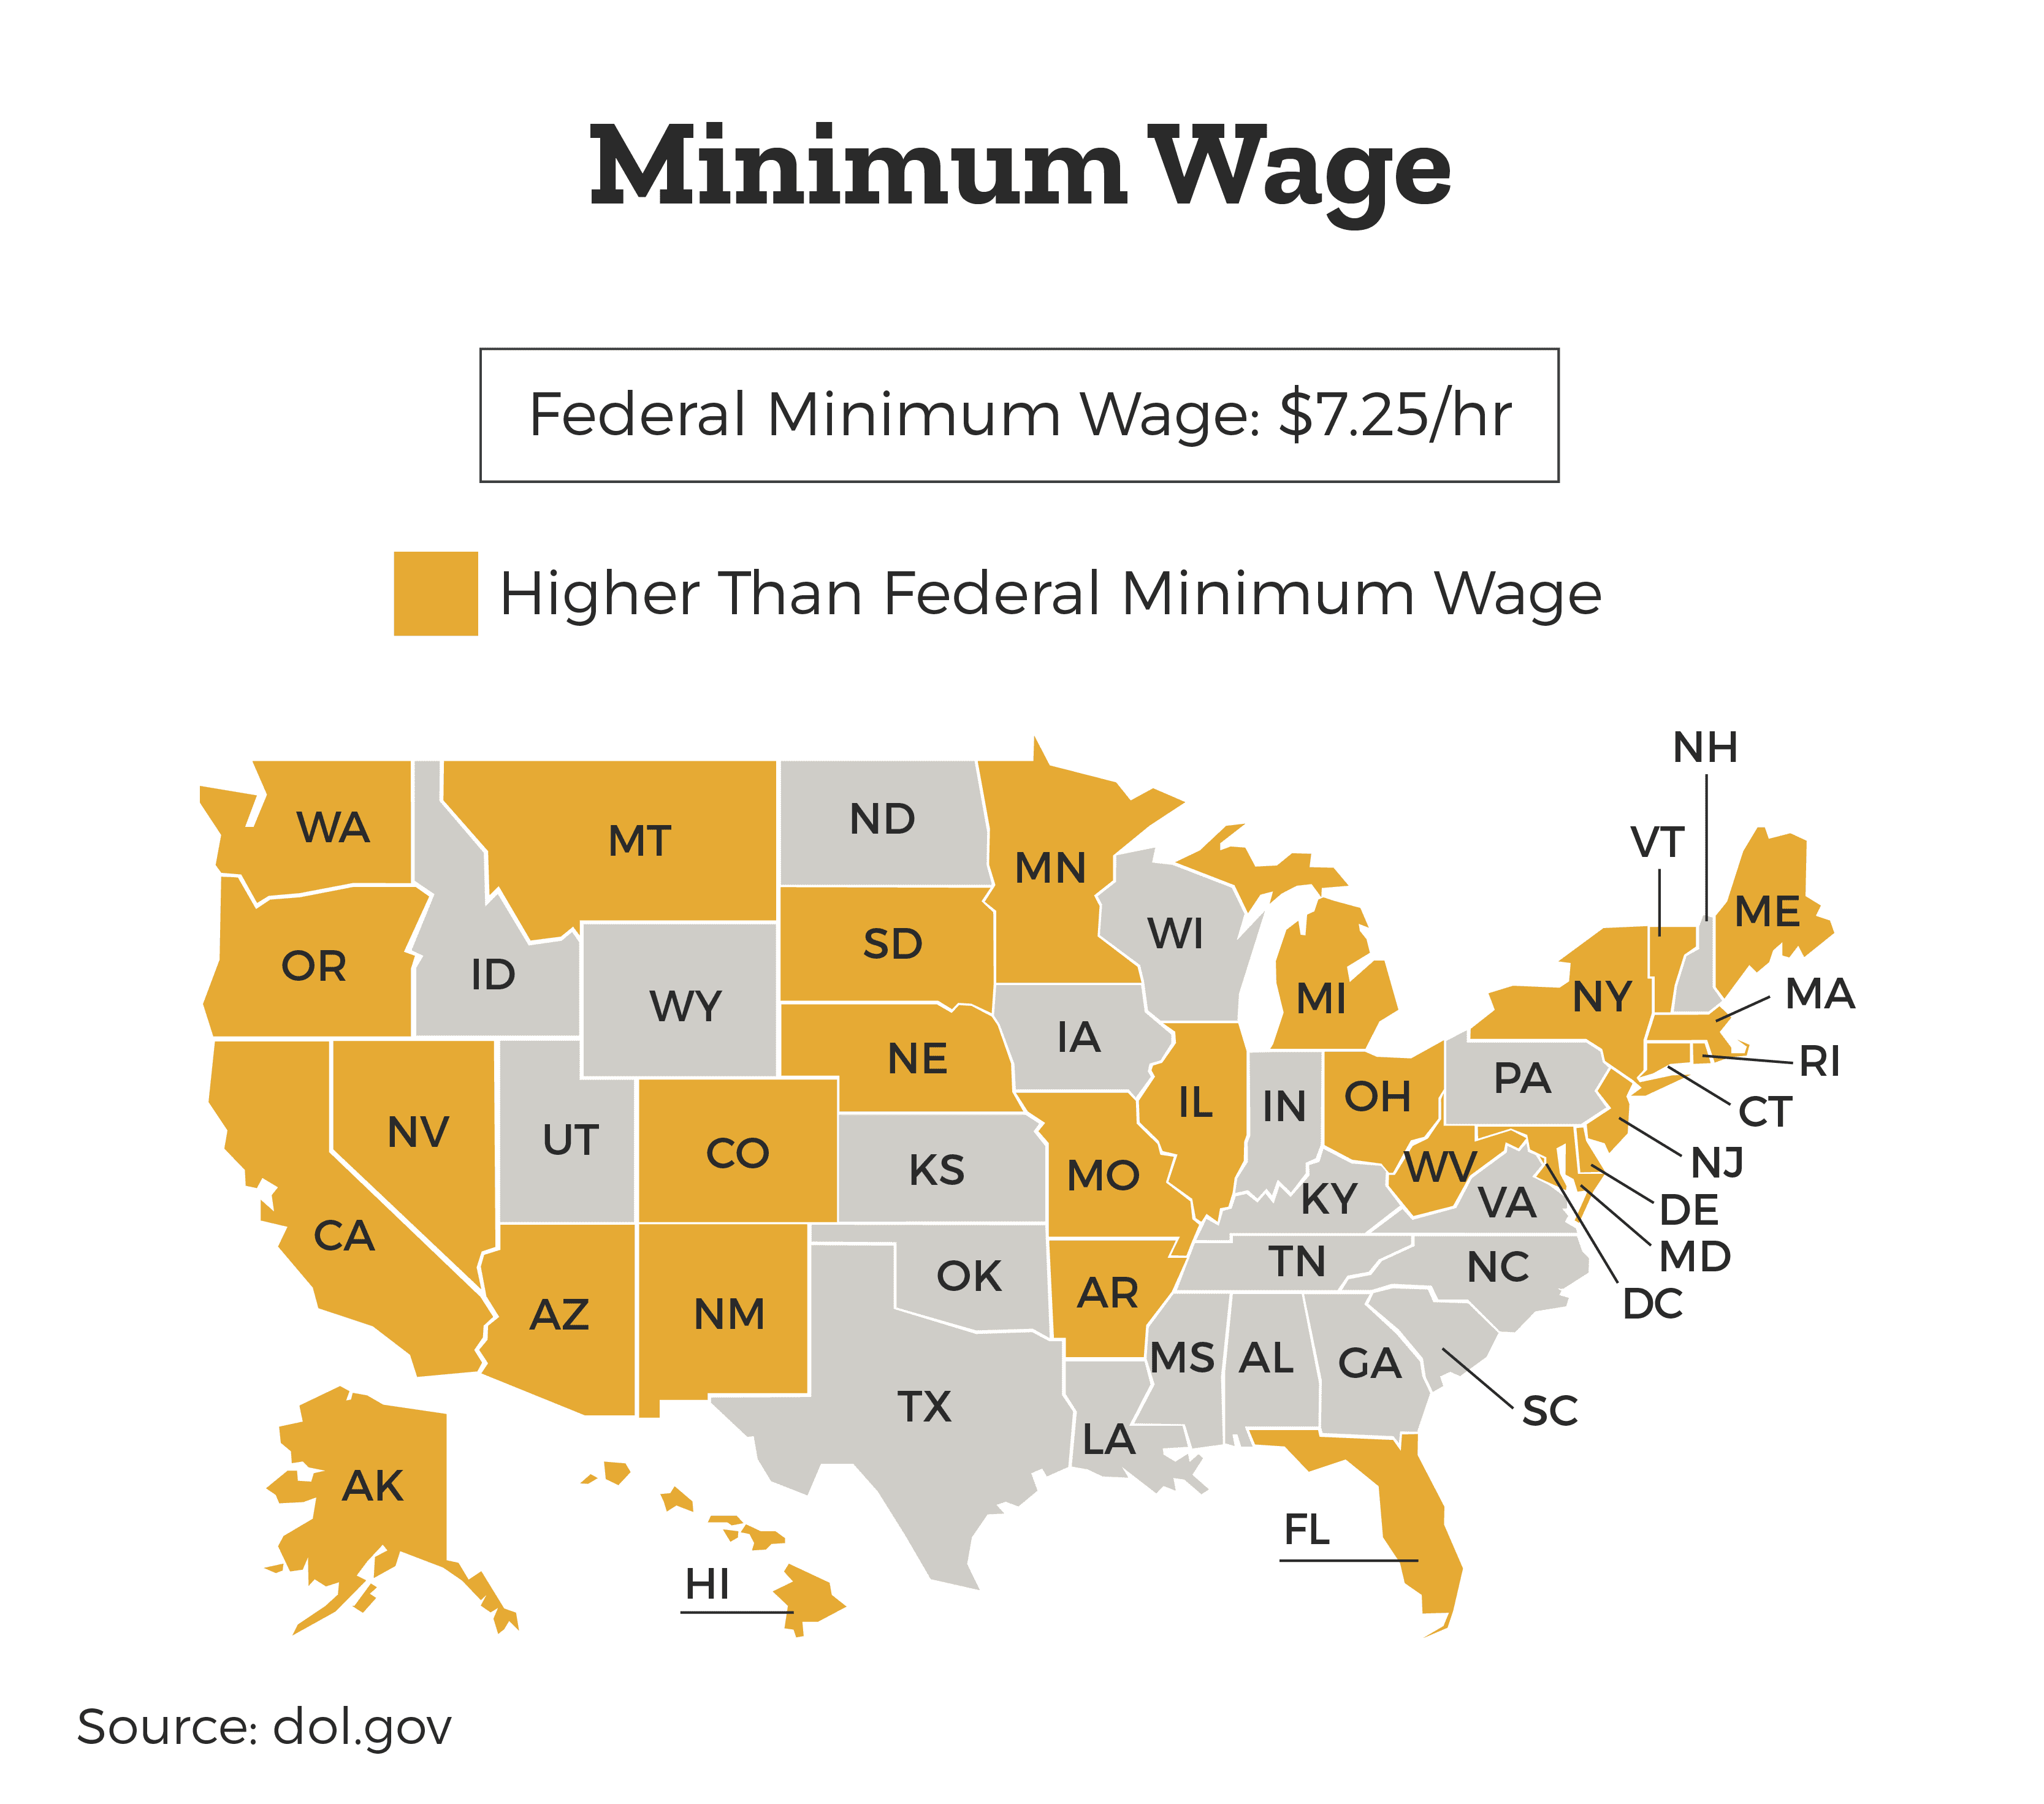 Minimum Wage Gap by State - A US map showing which states have a higher state minimum wage compared to the federal minimum wage.